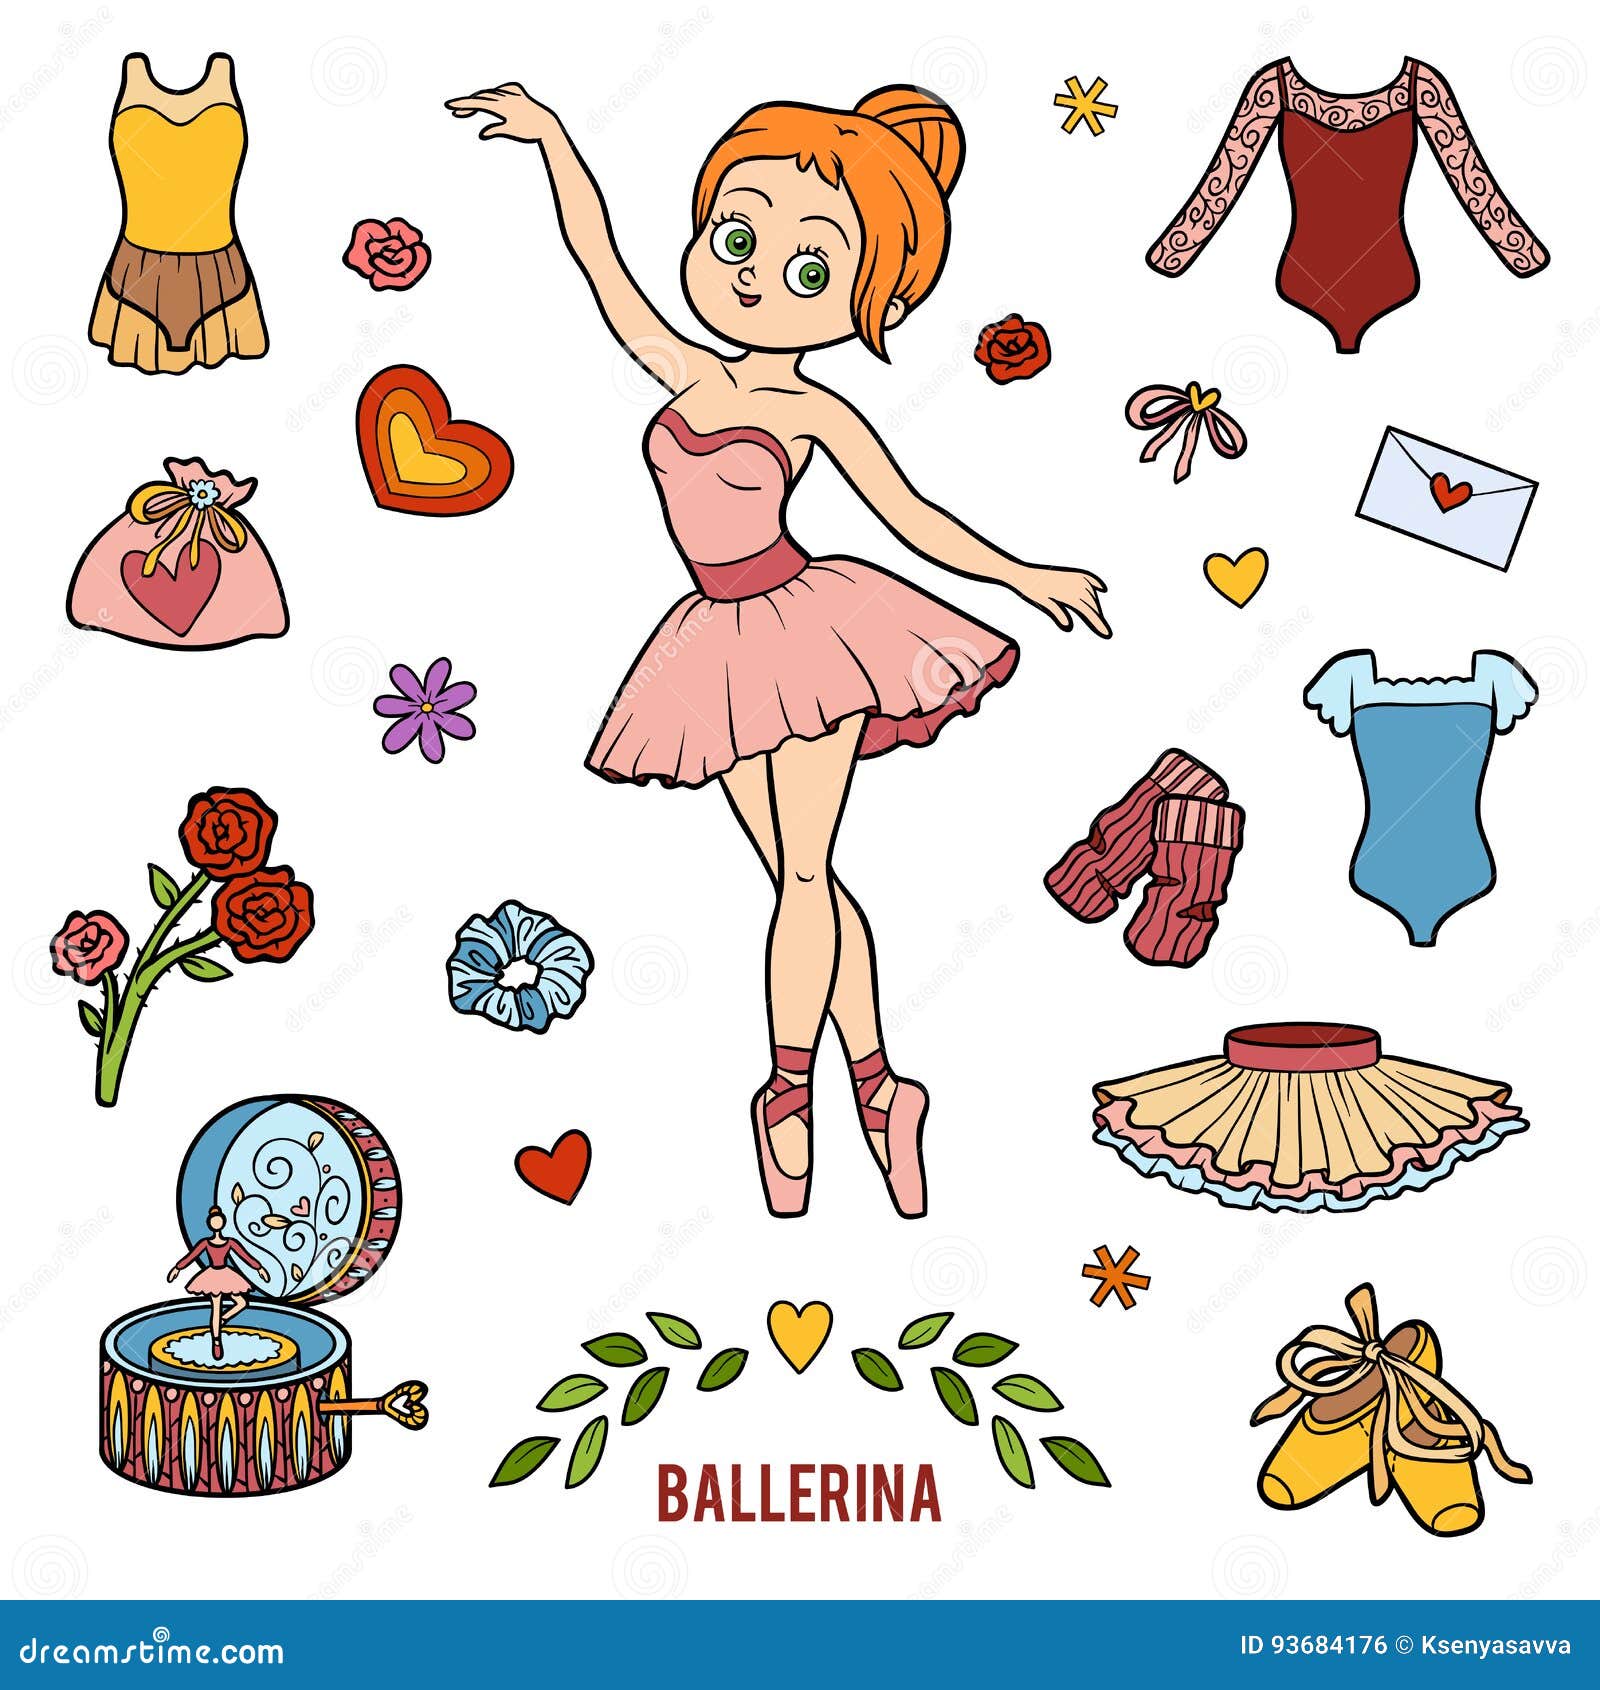 https://thumbs.dreamstime.com/z/vector-set-ballerina-dancing-objects-vector-set-ballerina-dancing-objects-cartoon-colorful-items-93684176.jpg